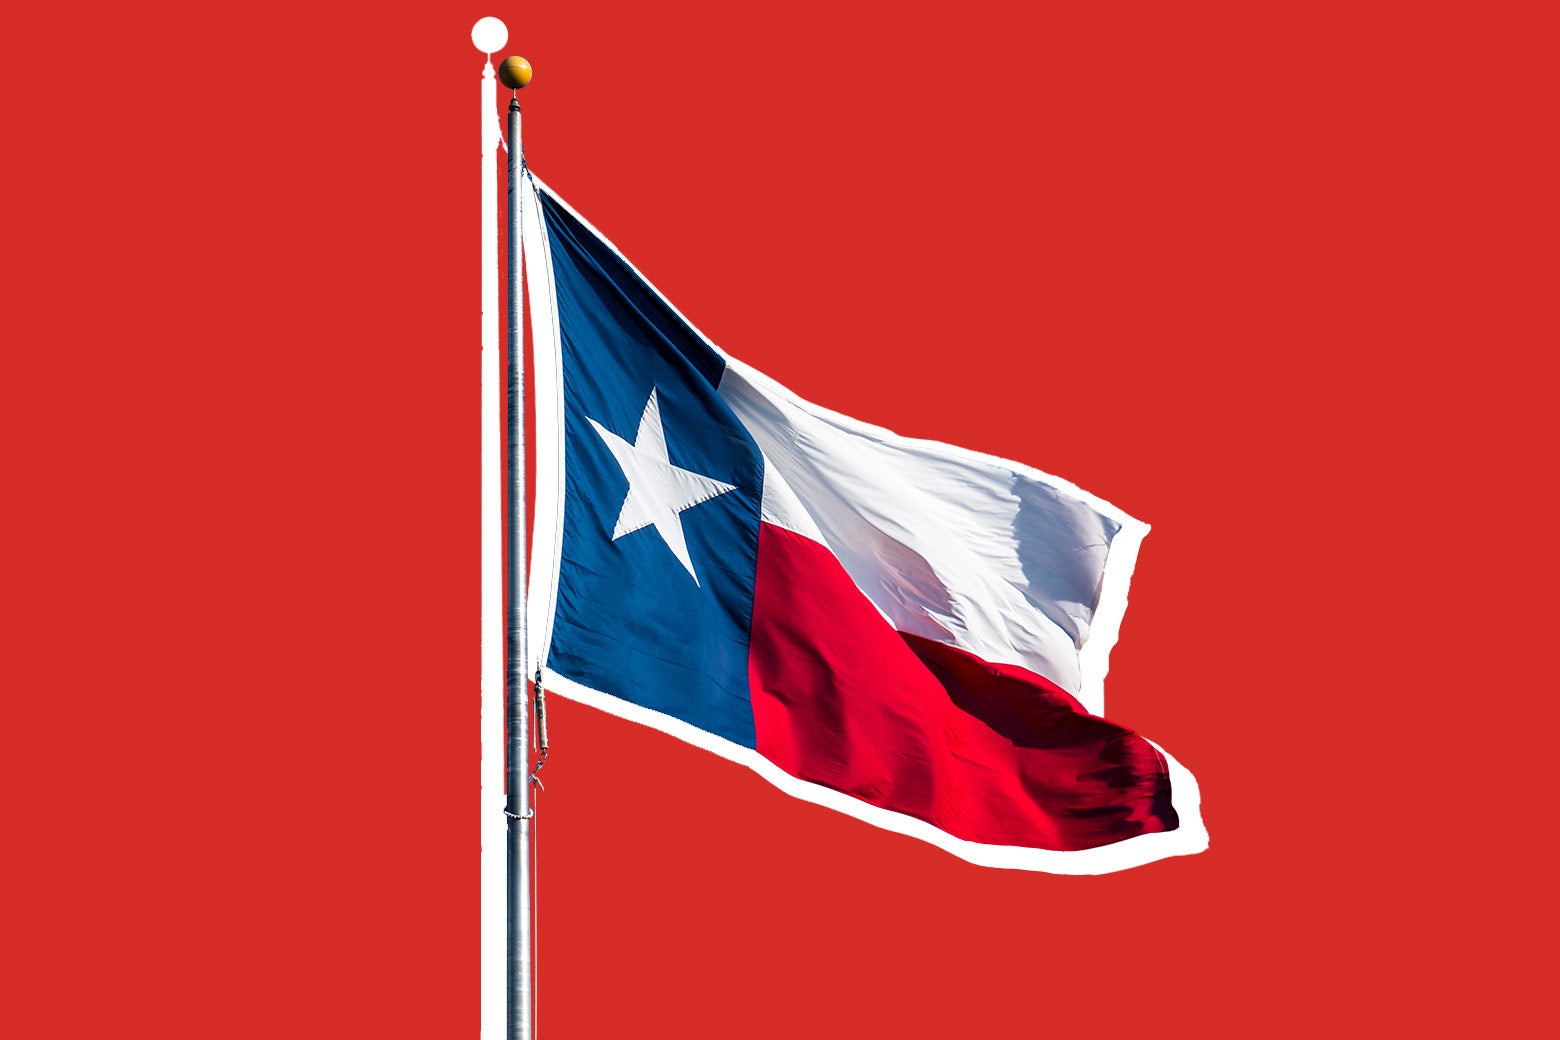 The Texas state flag against a red background.